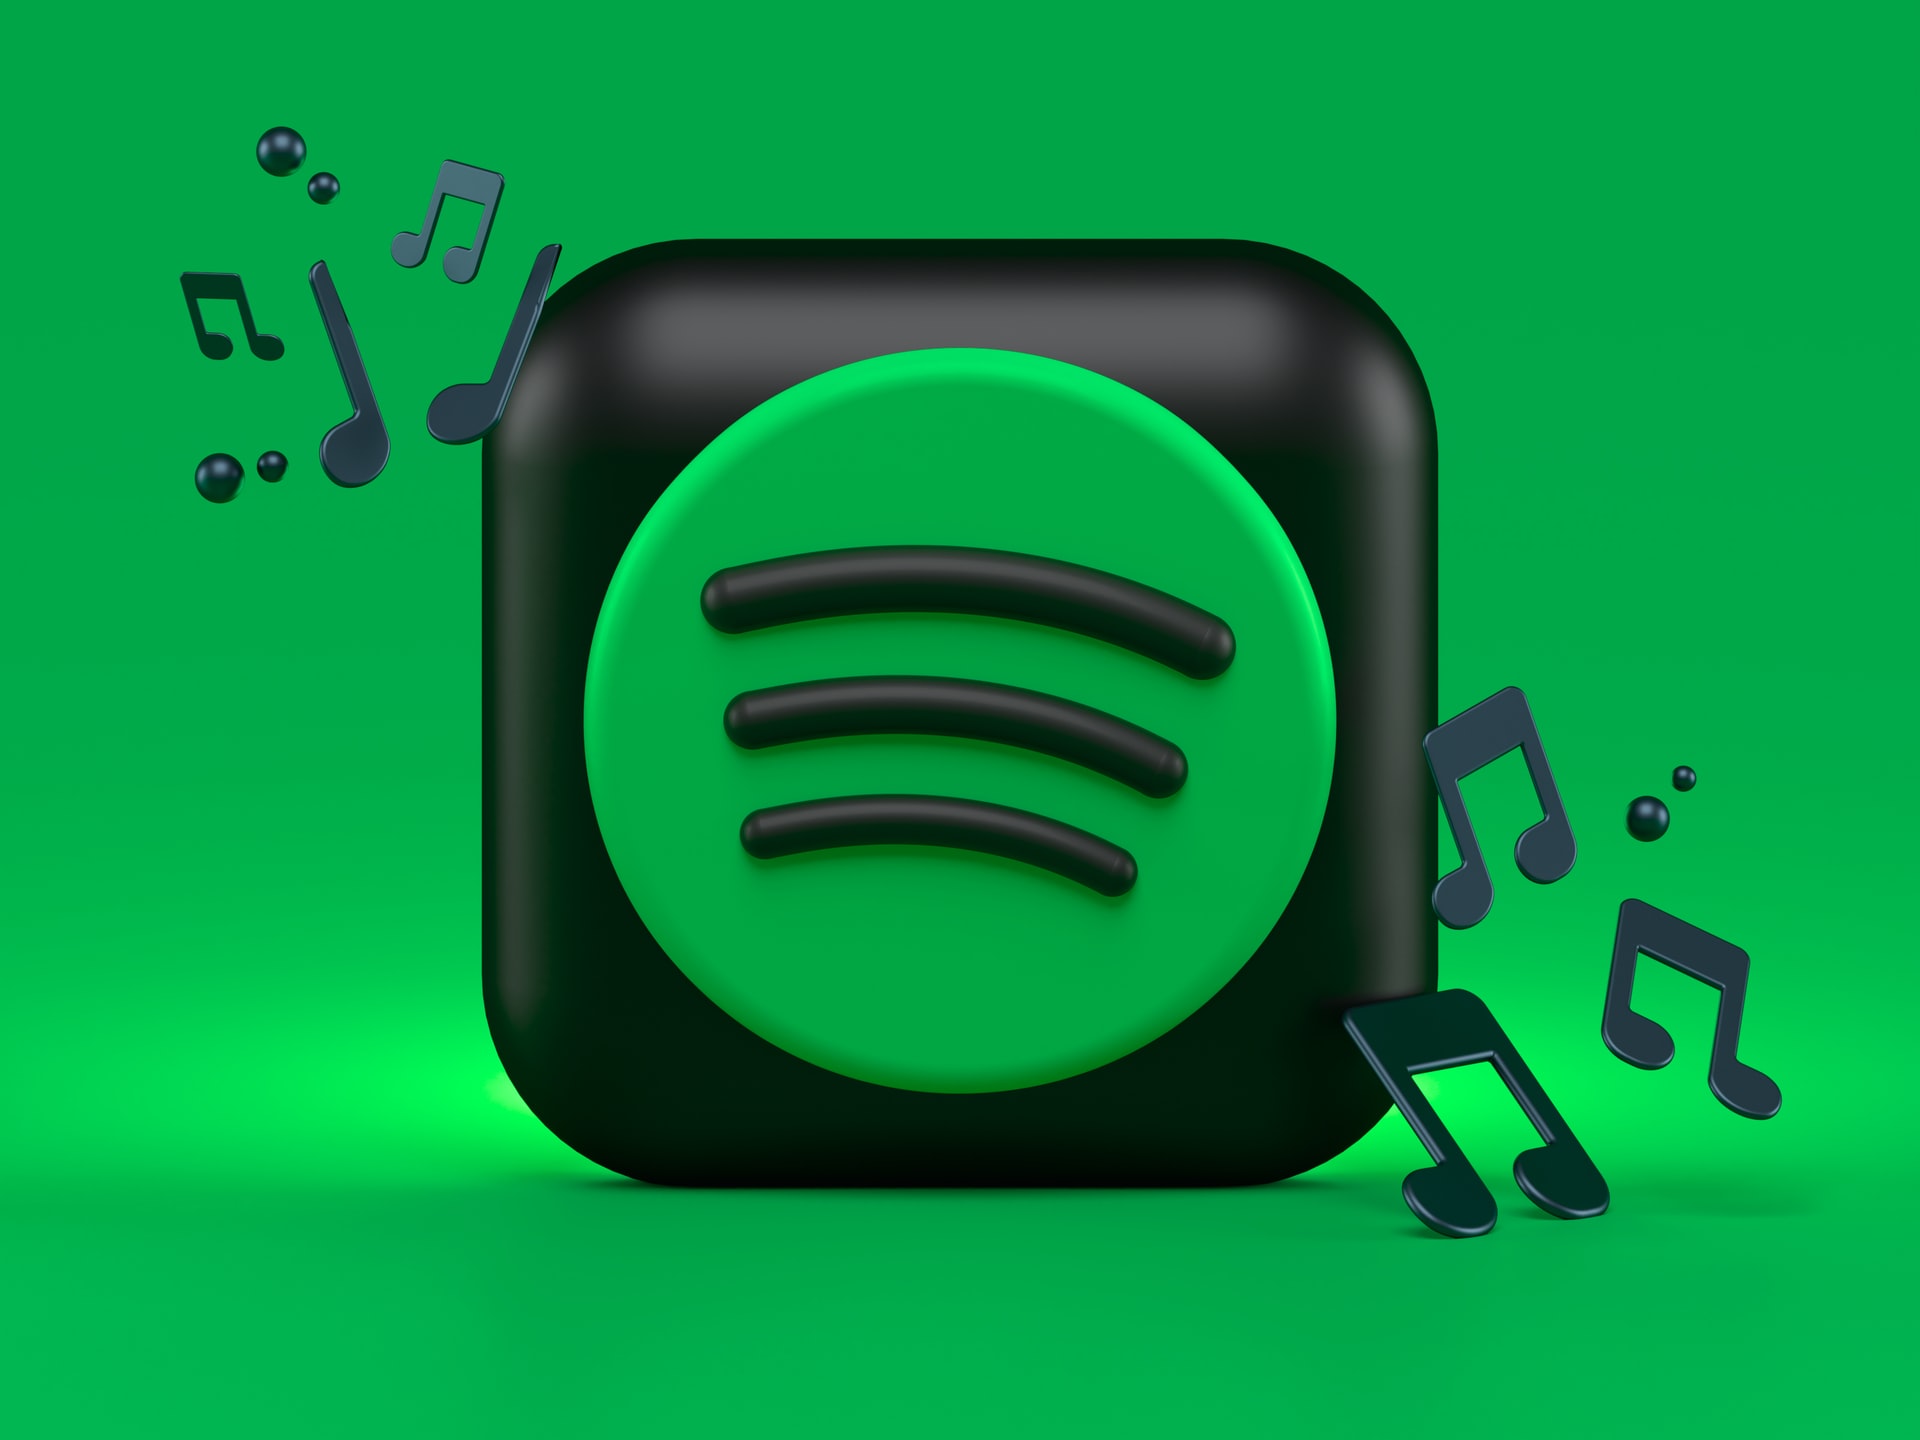 Why Spotify Can’t Play the Current Song